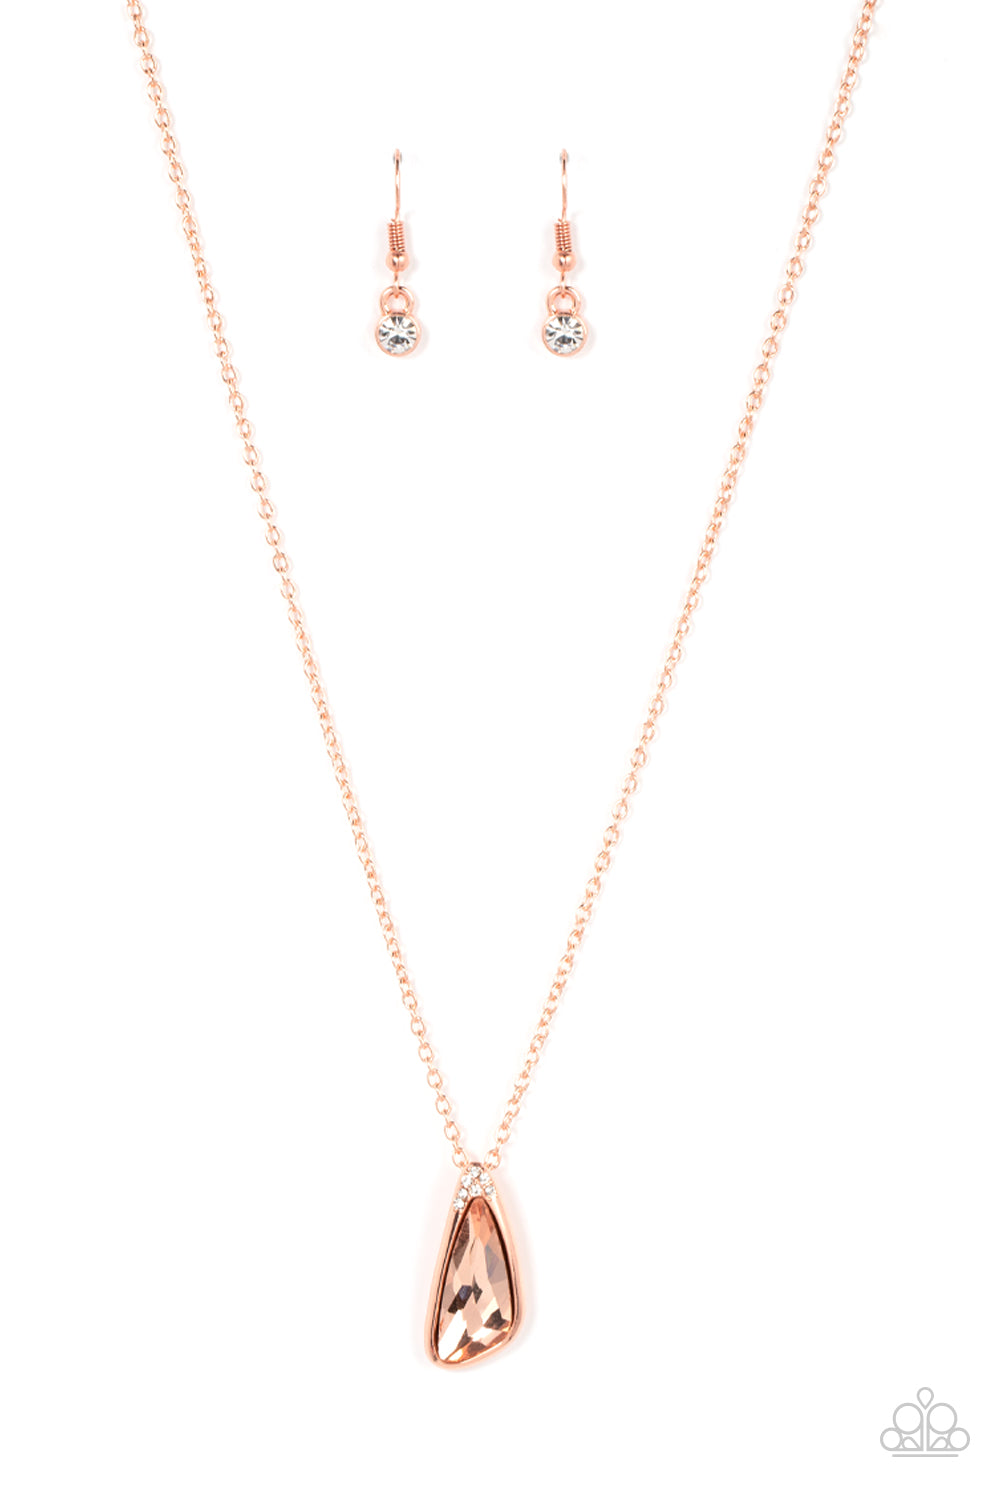 Envious Extravagance - Copper Gem Fashion Necklace - Paparazzi Accessories - An asymmetrical coppery gem is pressed into a shiny copper frame dusted in glassy white rhinestones, resulting in a refined pendant at the bottom of a dainty shiny copper chain. Features an adjustable clasp closure.